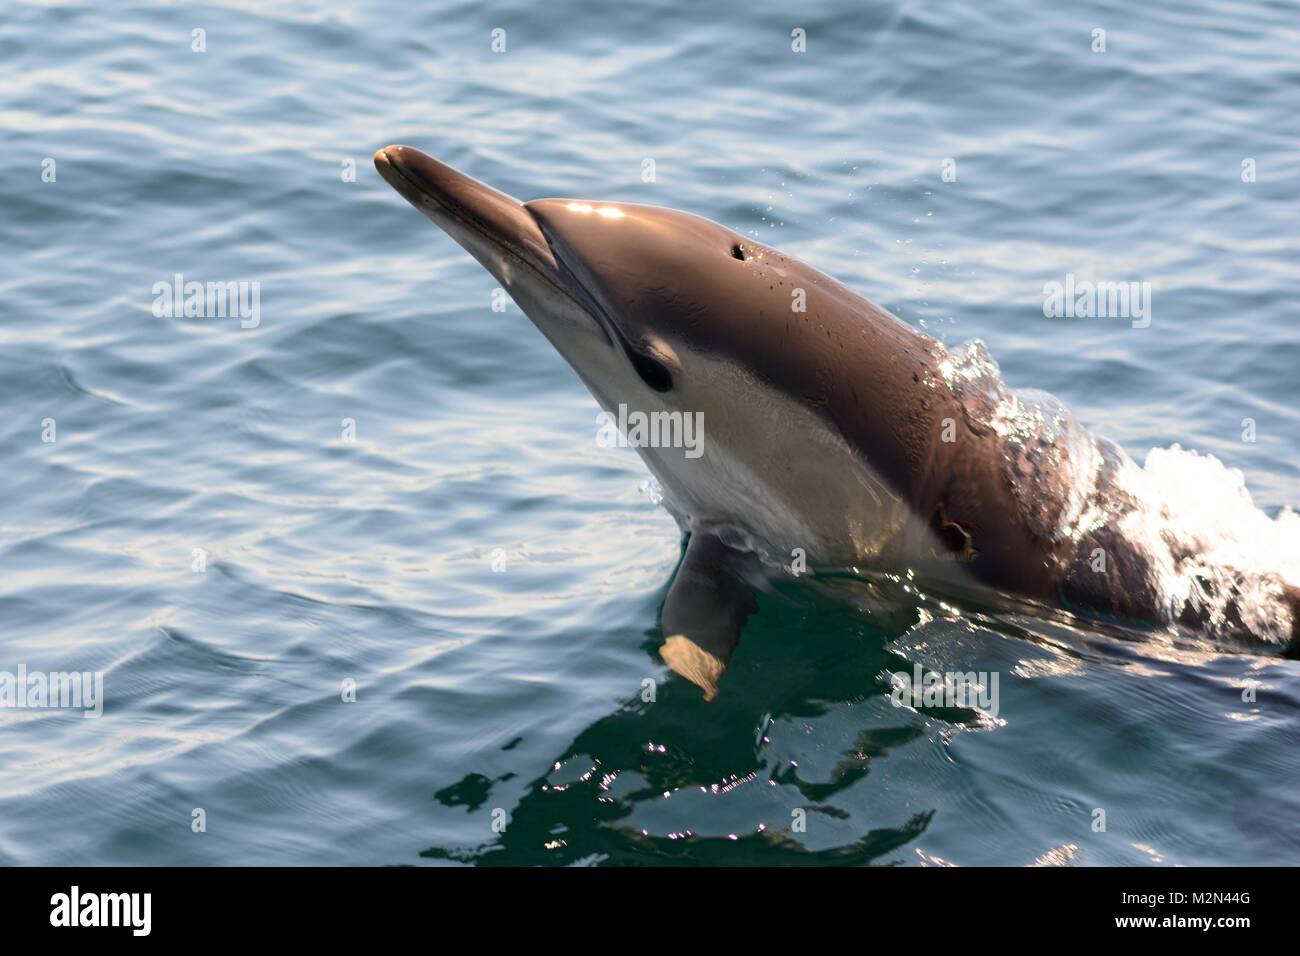 Close up of a common dolphin jumping out of the water Stock Photo